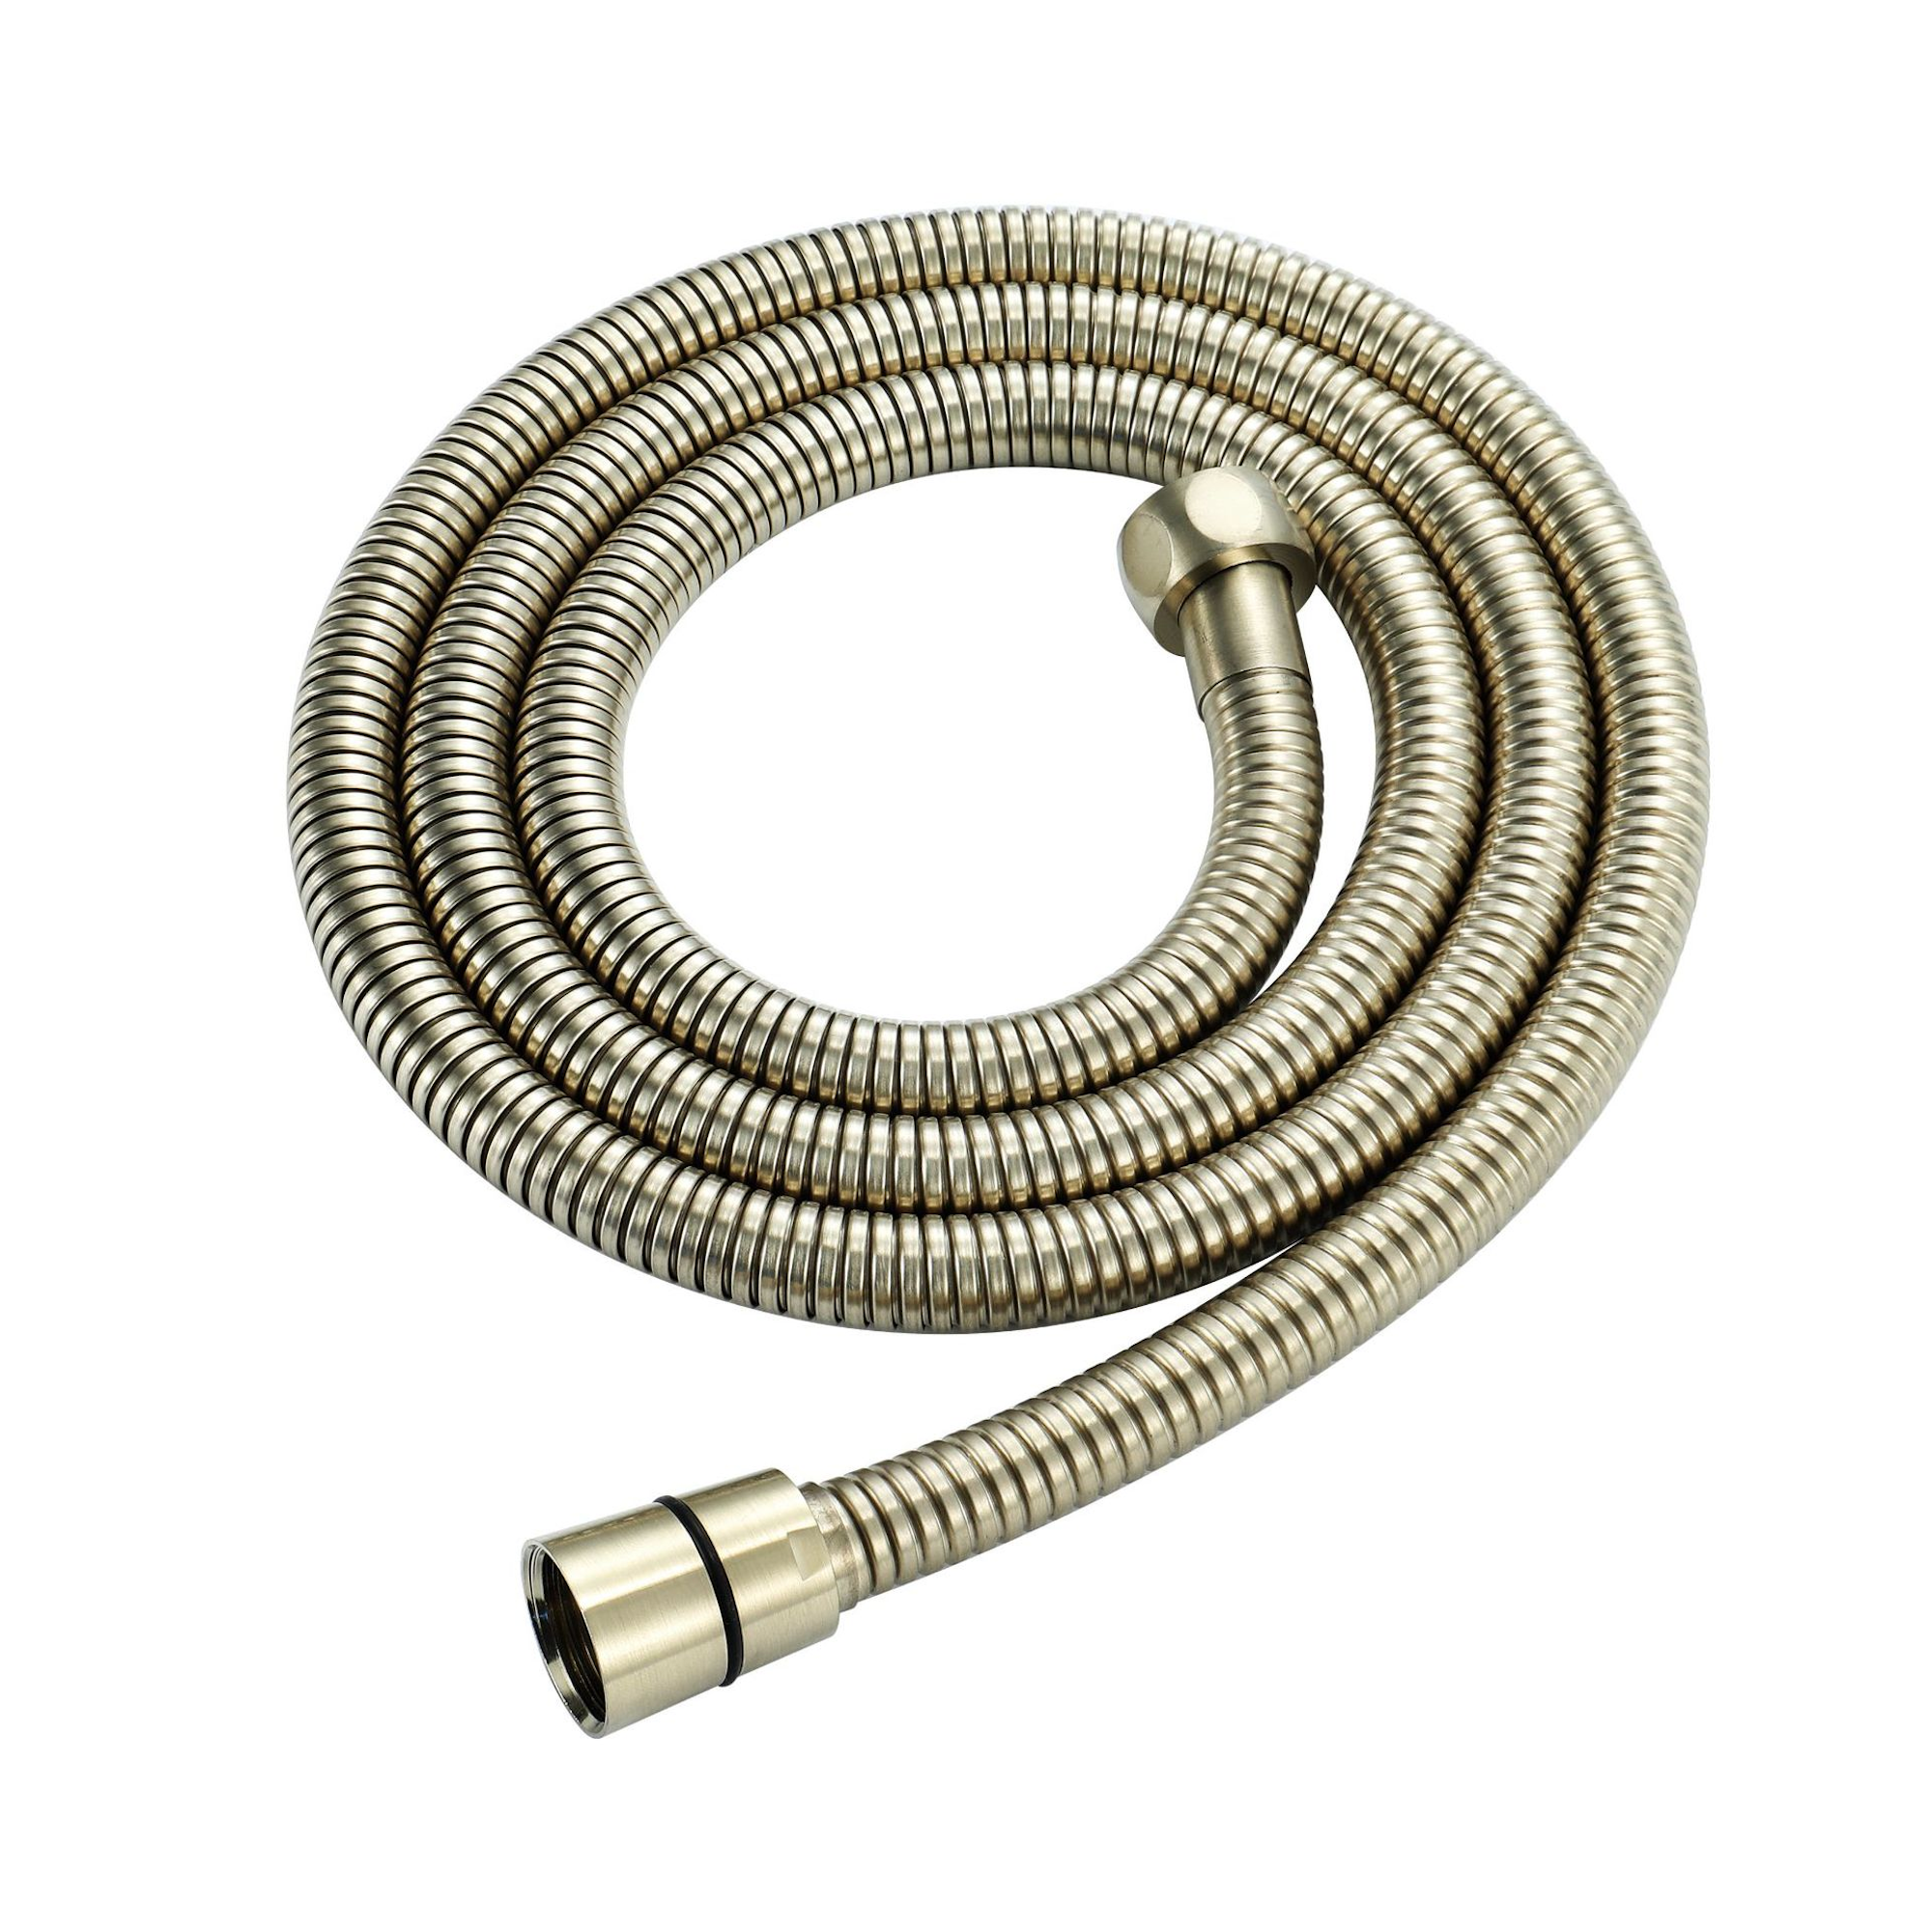 1.5m stainless steel shower hose - Brushed Brass